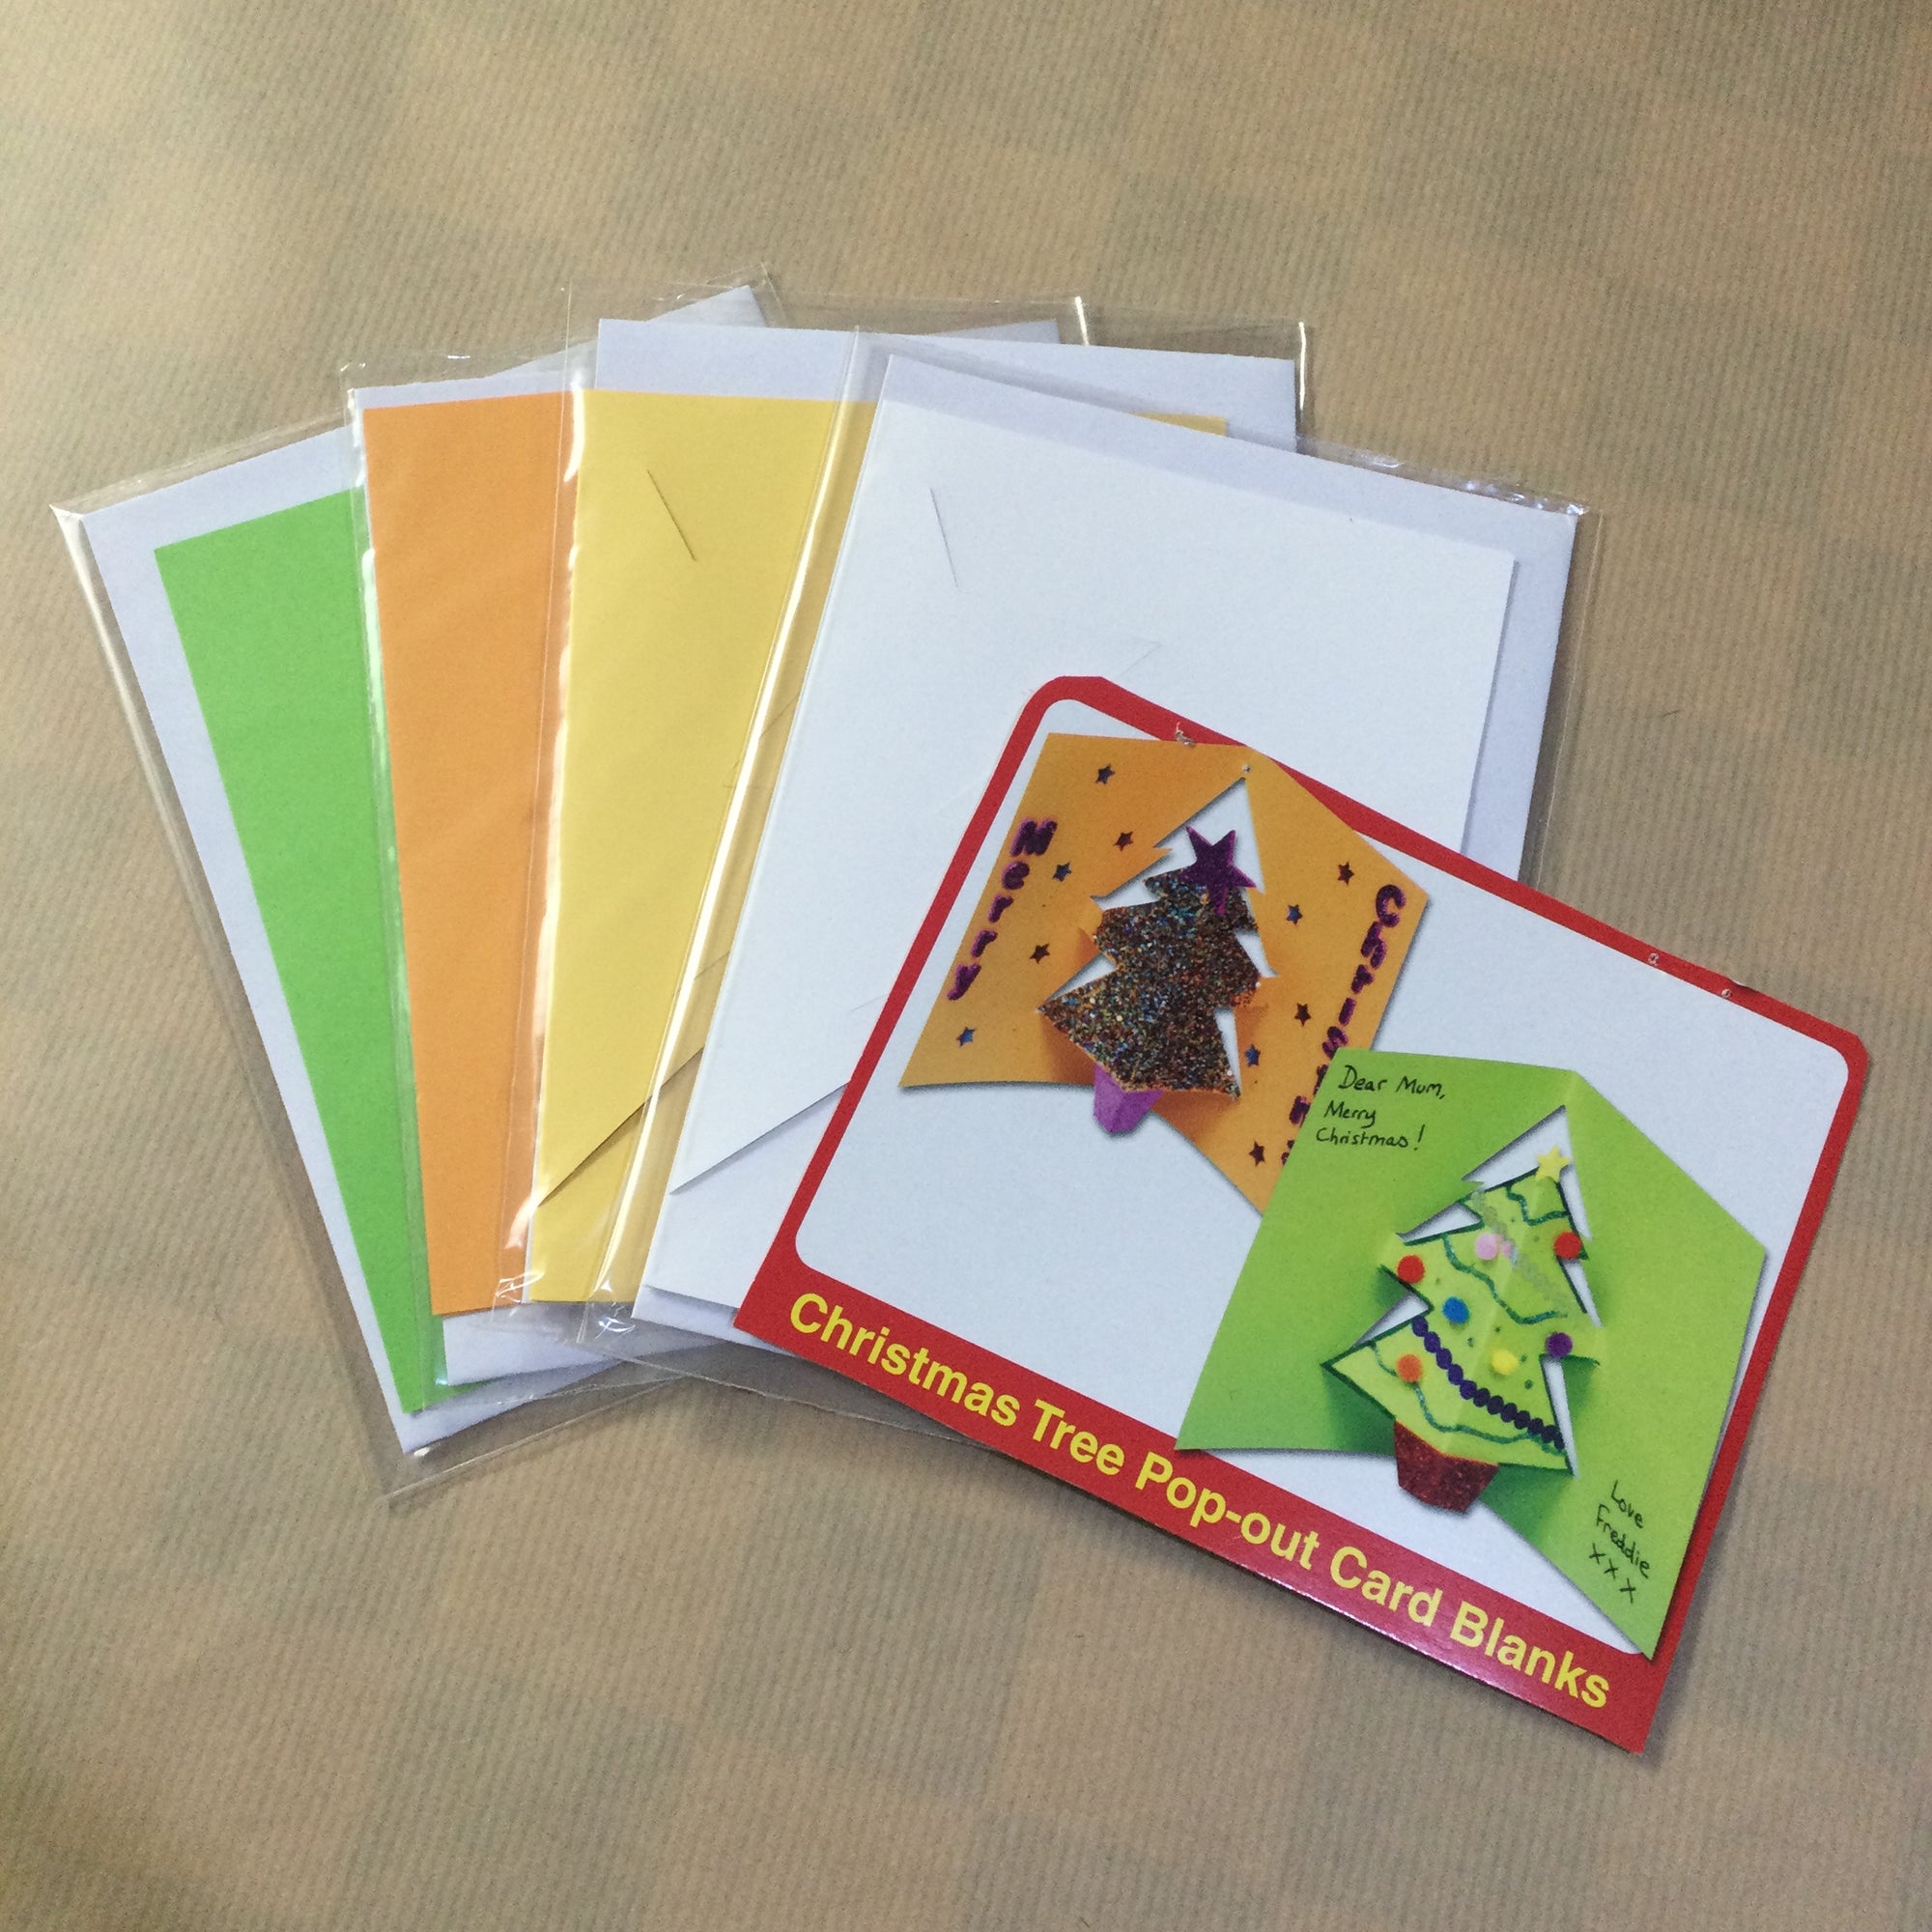 Design Your Own Christmas Tree Pop-out Cards